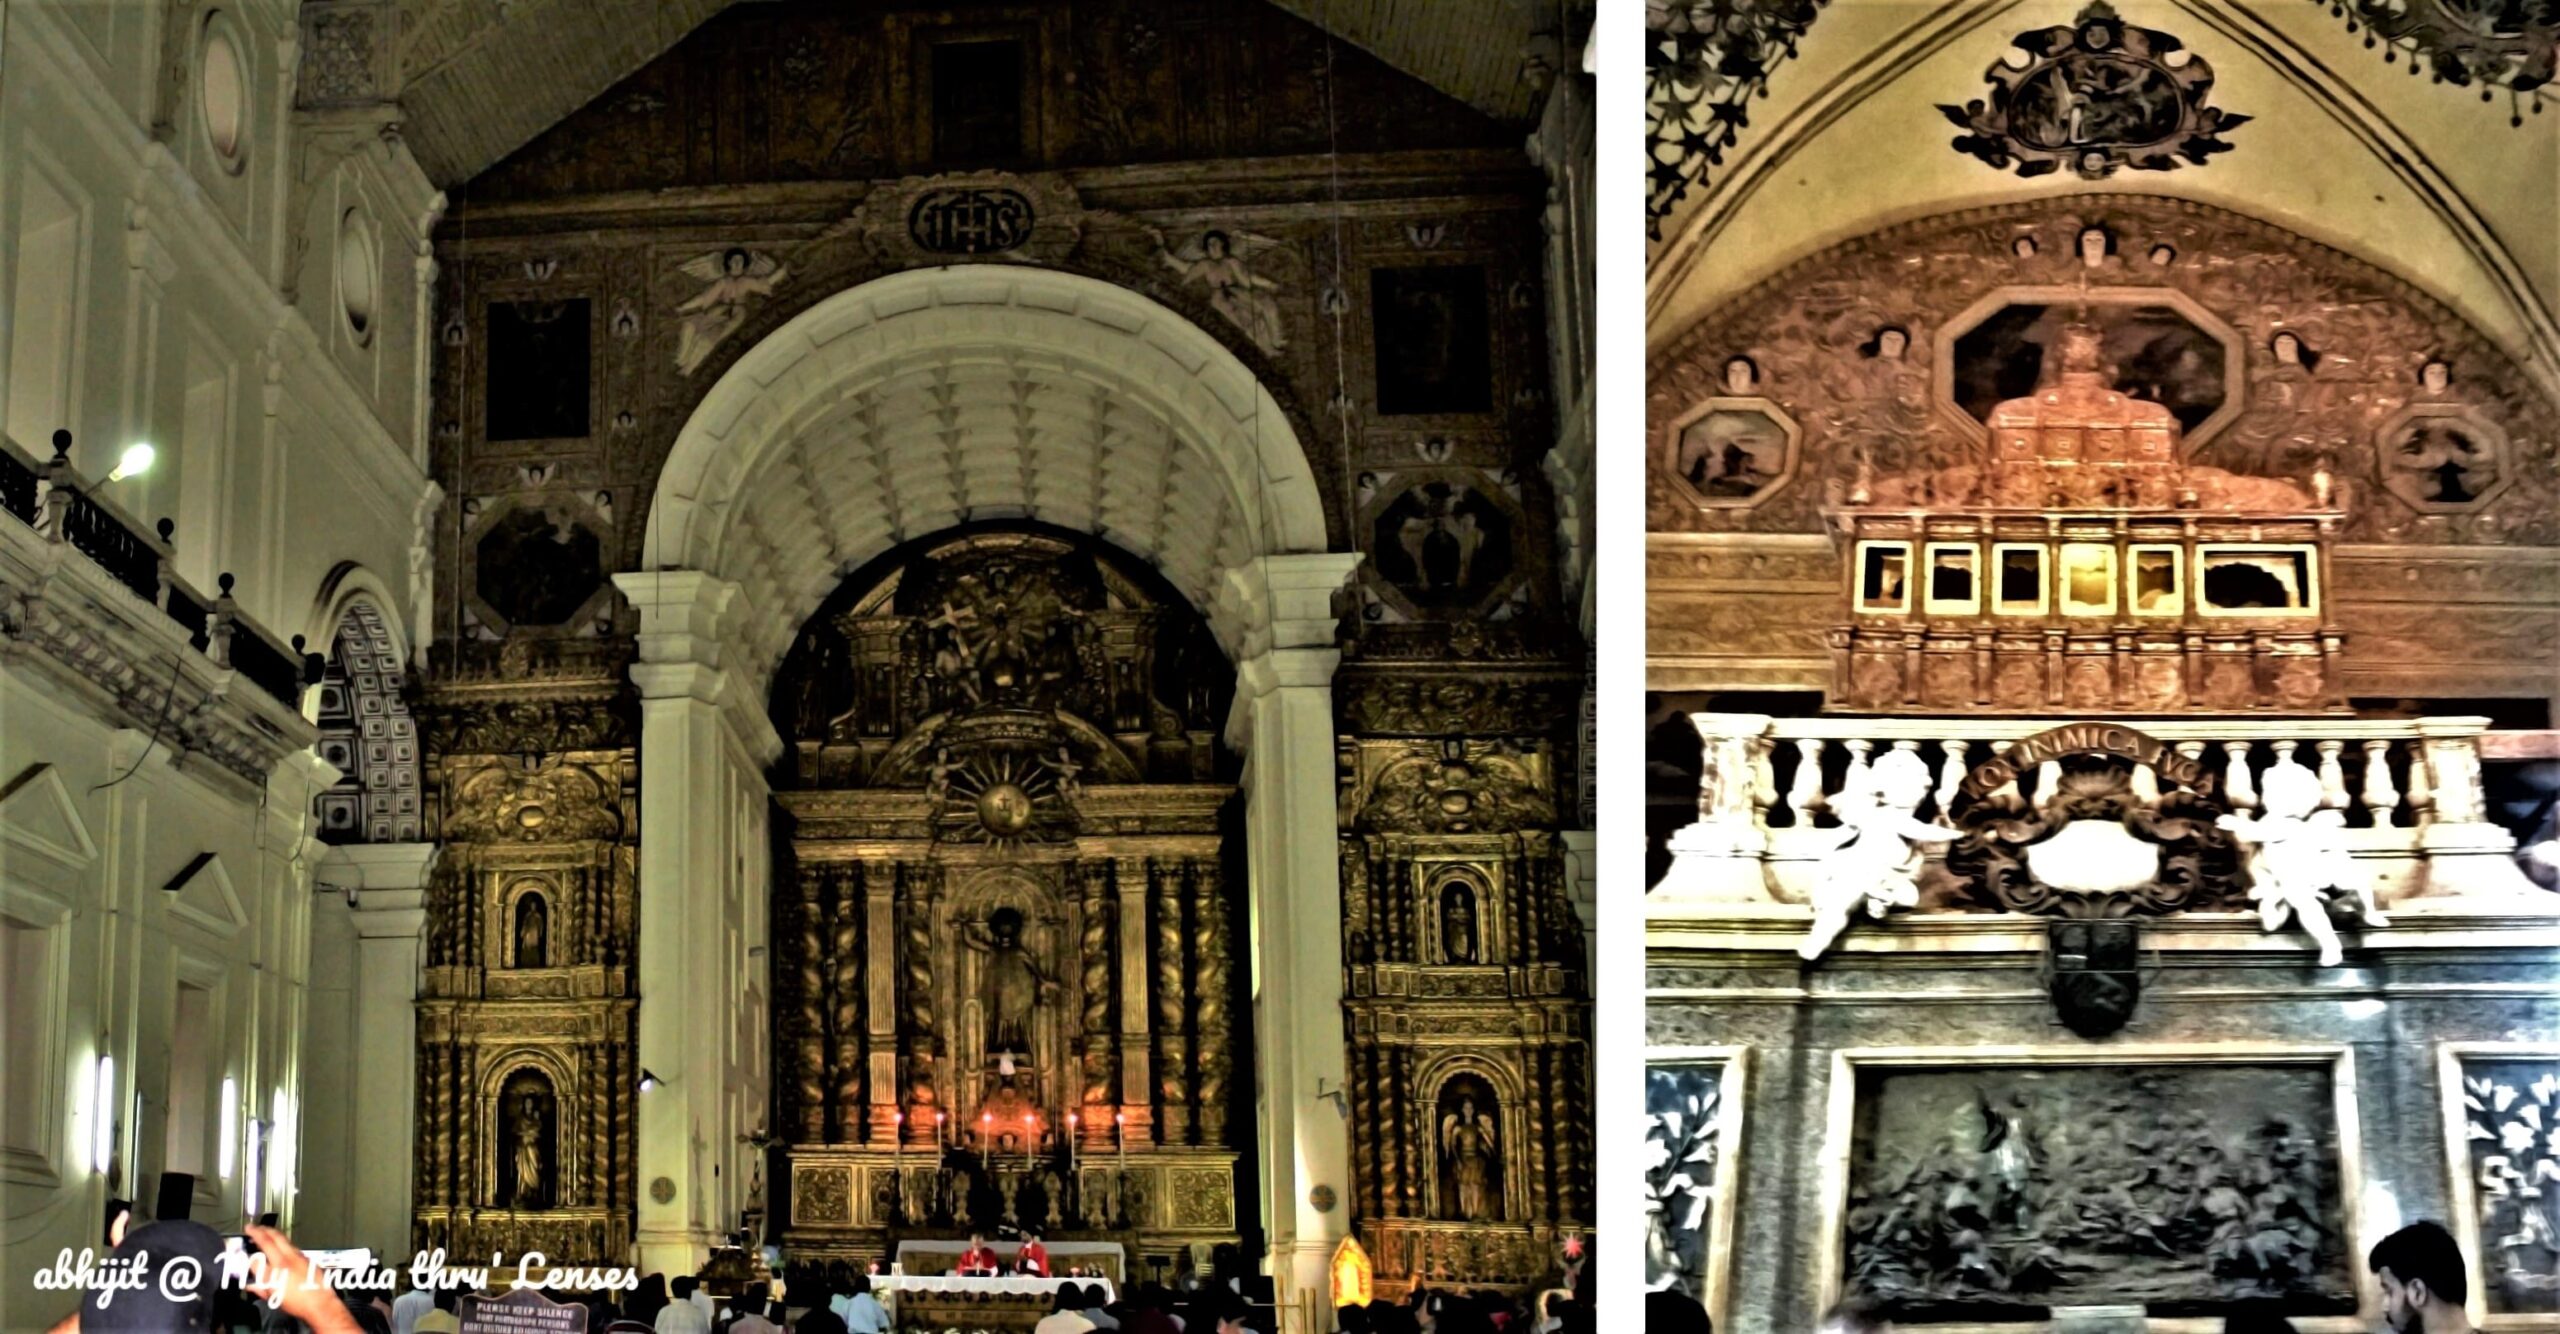 Left: Interiors of the Basilica of Bom Jesus | Right: The mummified body of St. Francis Xavier kept in a glass coffin within a silver casket on the top of a chapel 